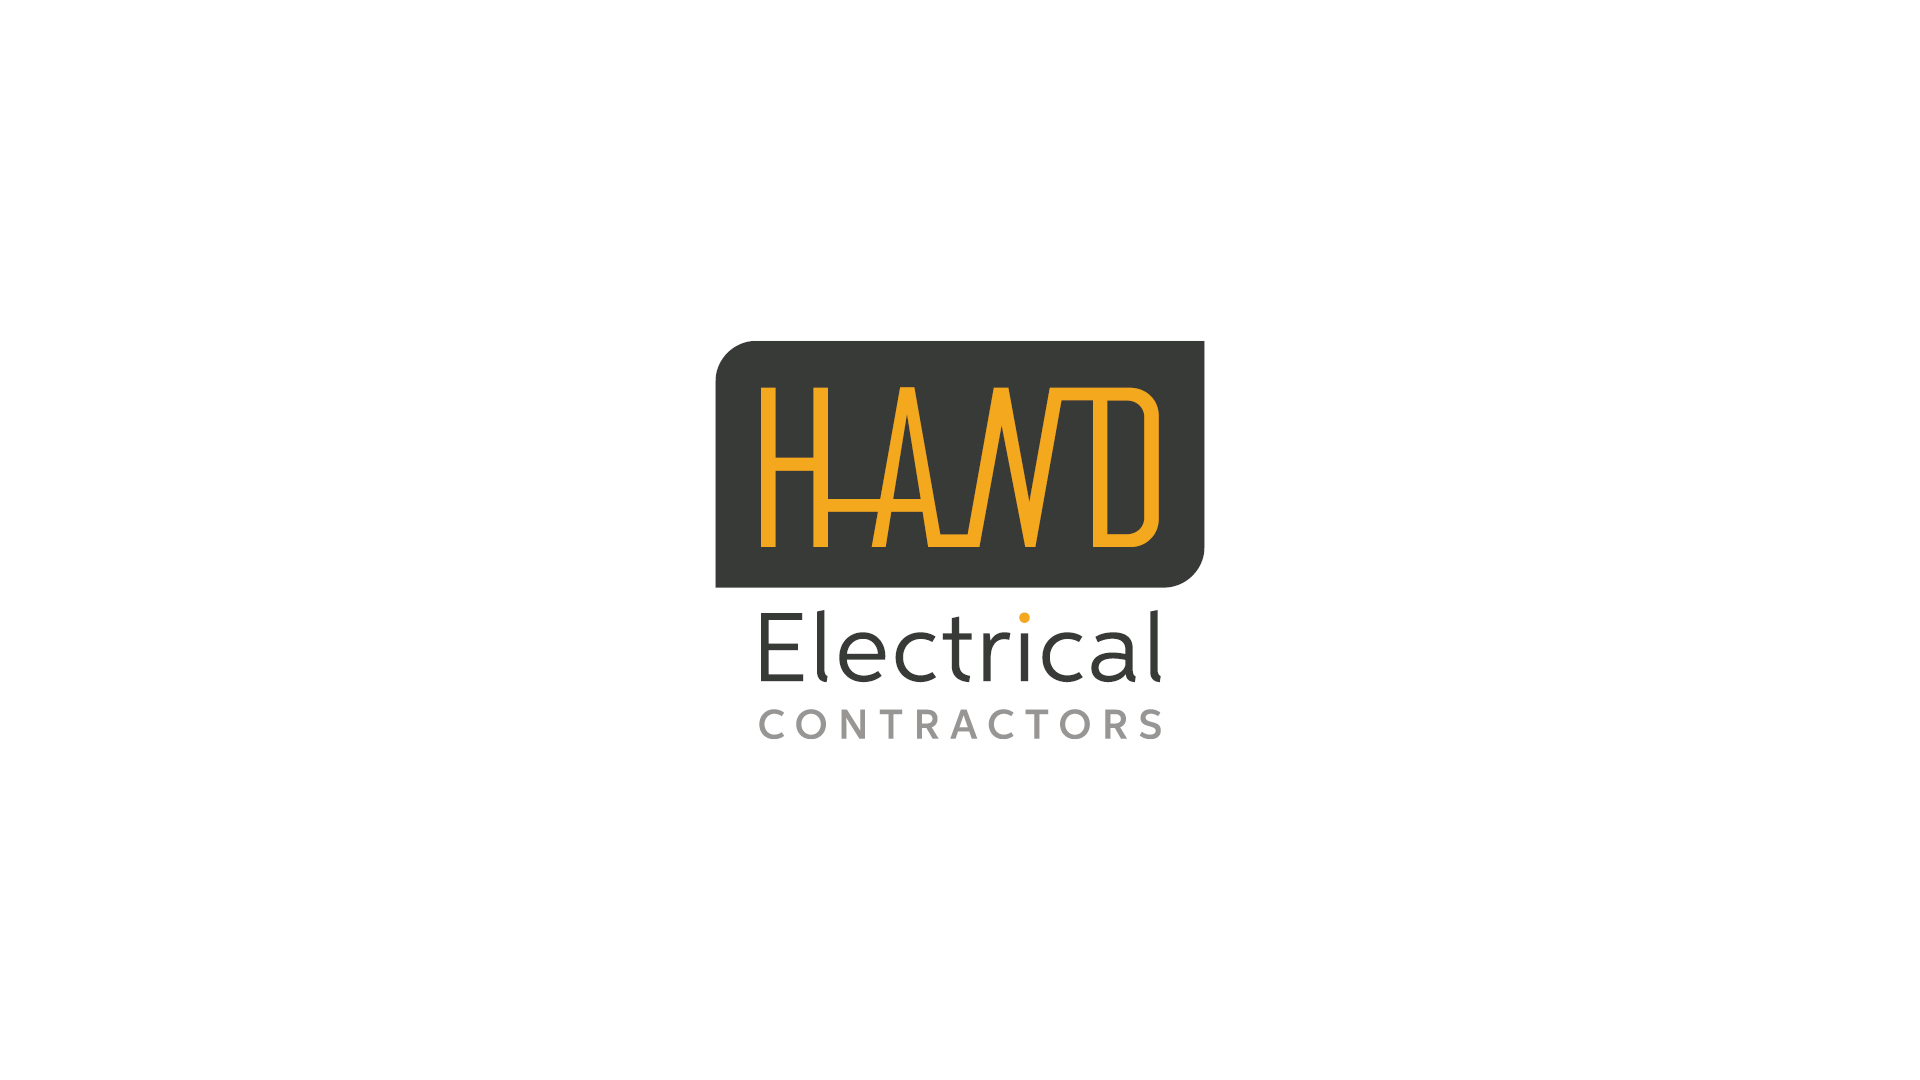 Hand Electrical Logo and Branding Design - Saunders Design Group